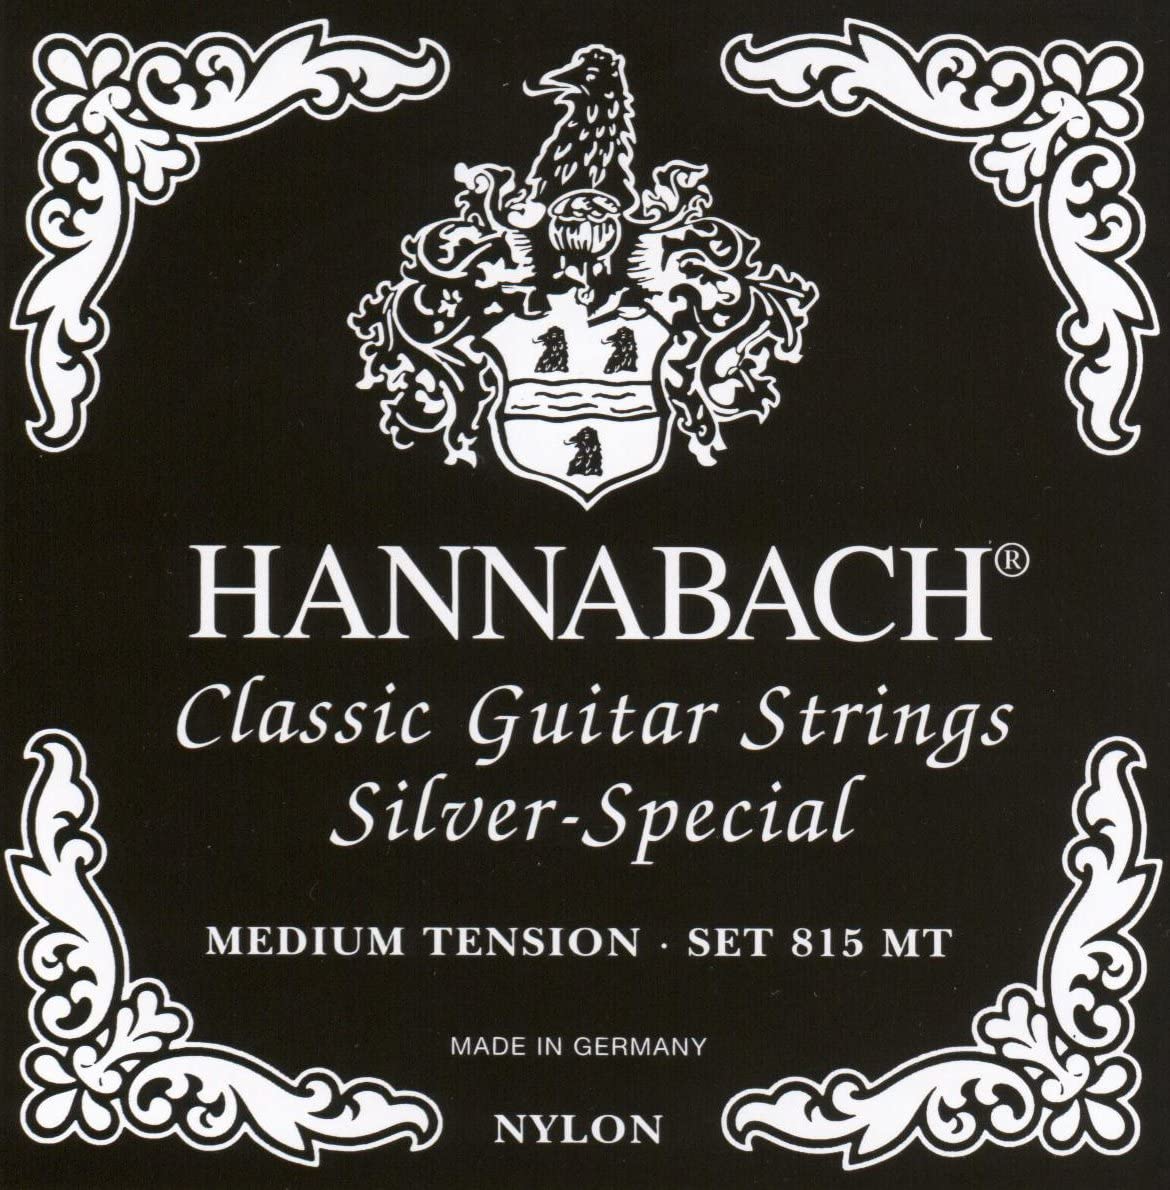 Hannabach Silver Special Medium Tension String  on a white background